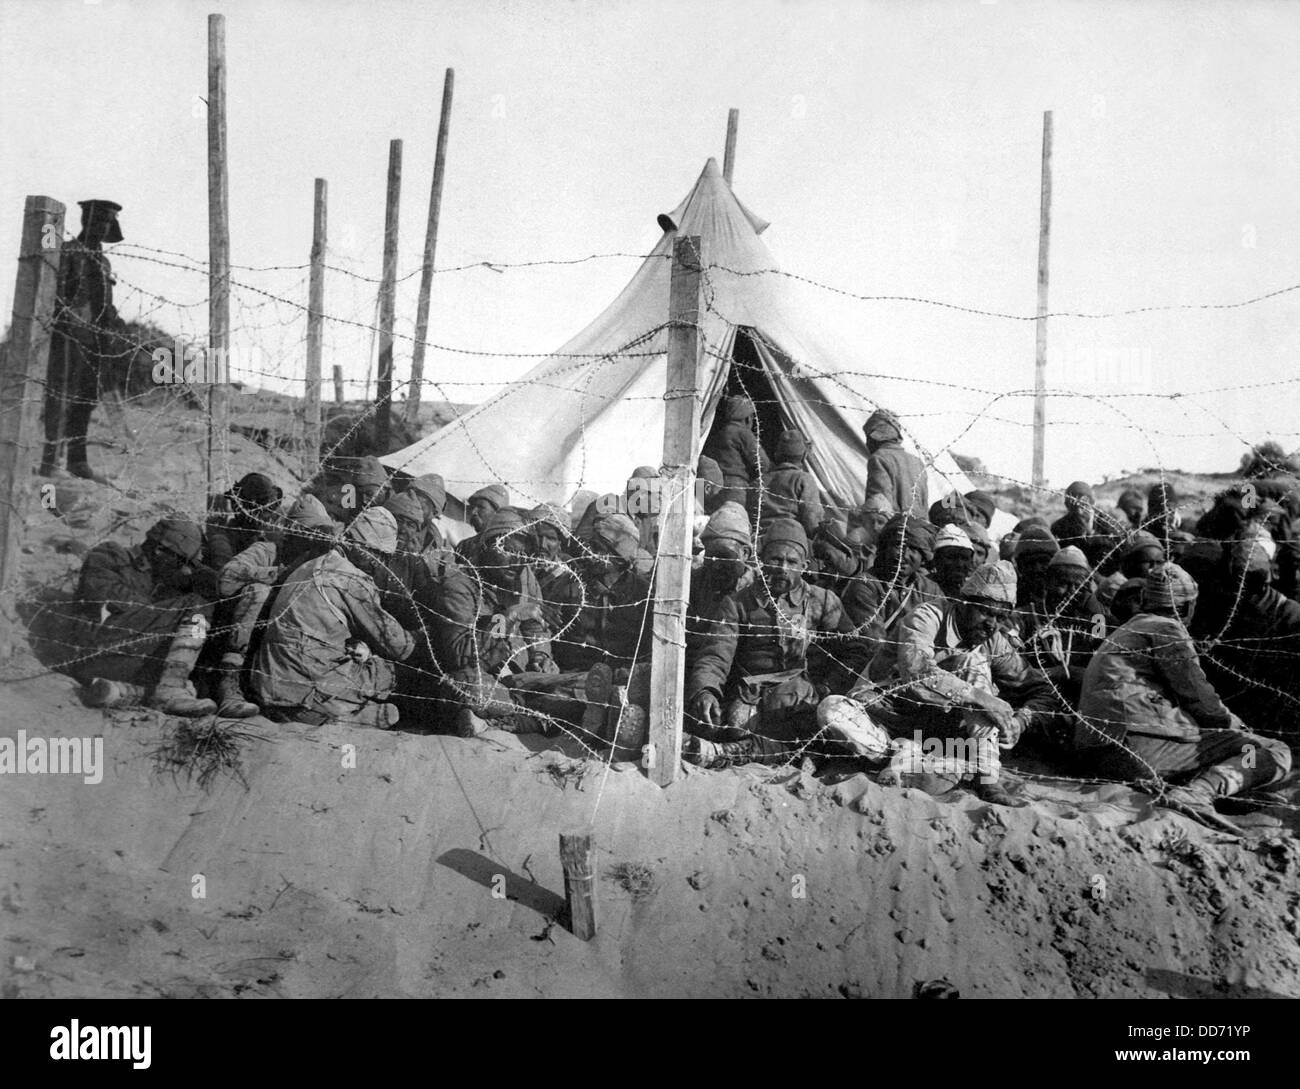 Turkish prisoners behind barbed wire at Seddul Bahr during the World War I Dardanelles Campaign. 1915. Stock Photo